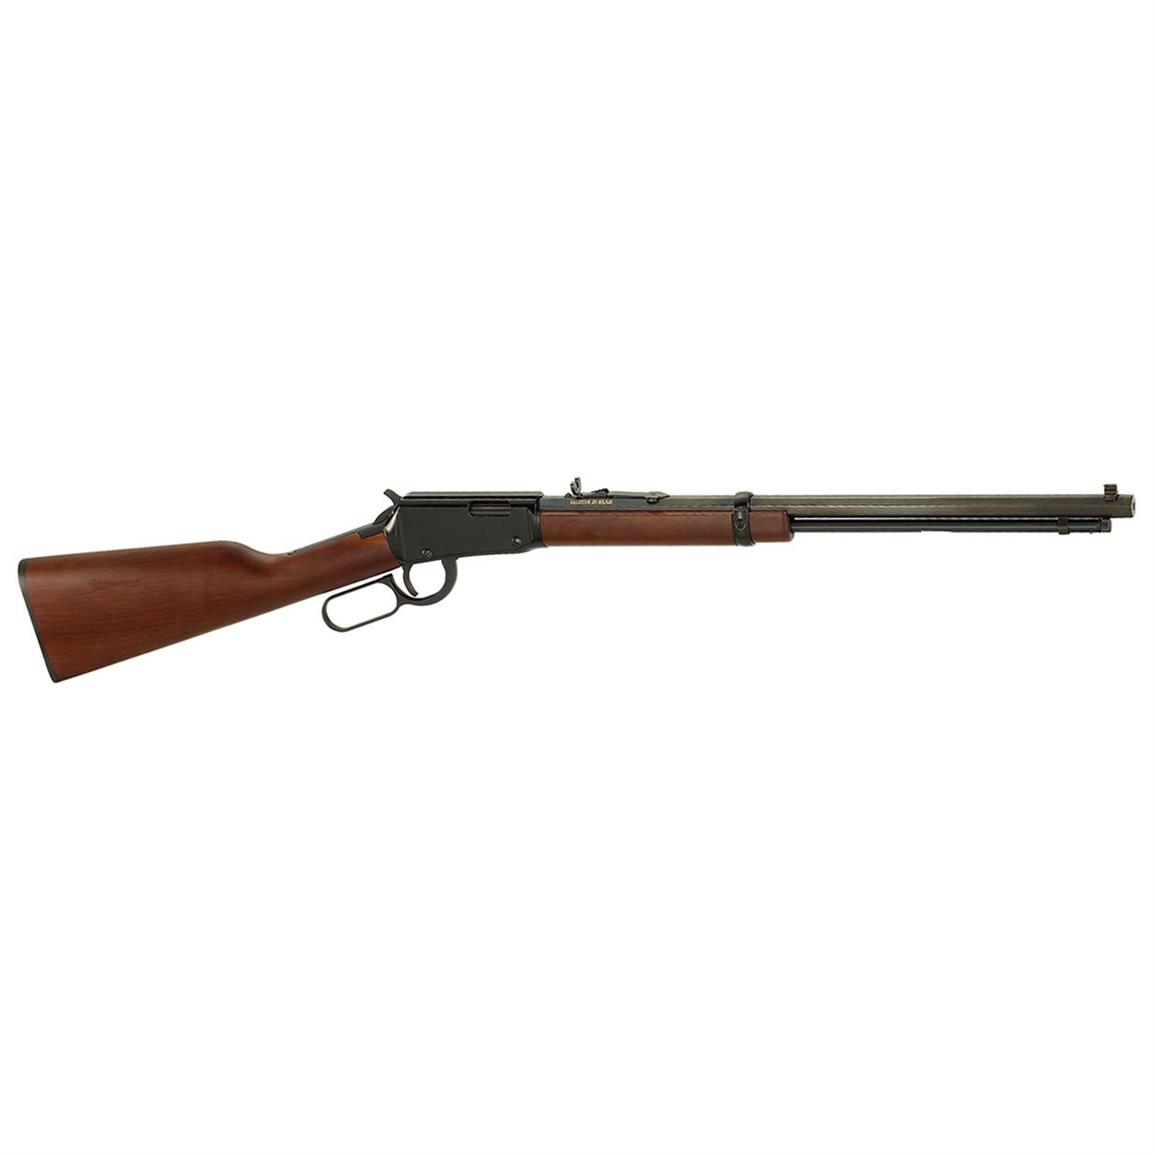 Henry Frontier, Lever Action, .17 HMR, 20" Barrel, 12+1 Rounds